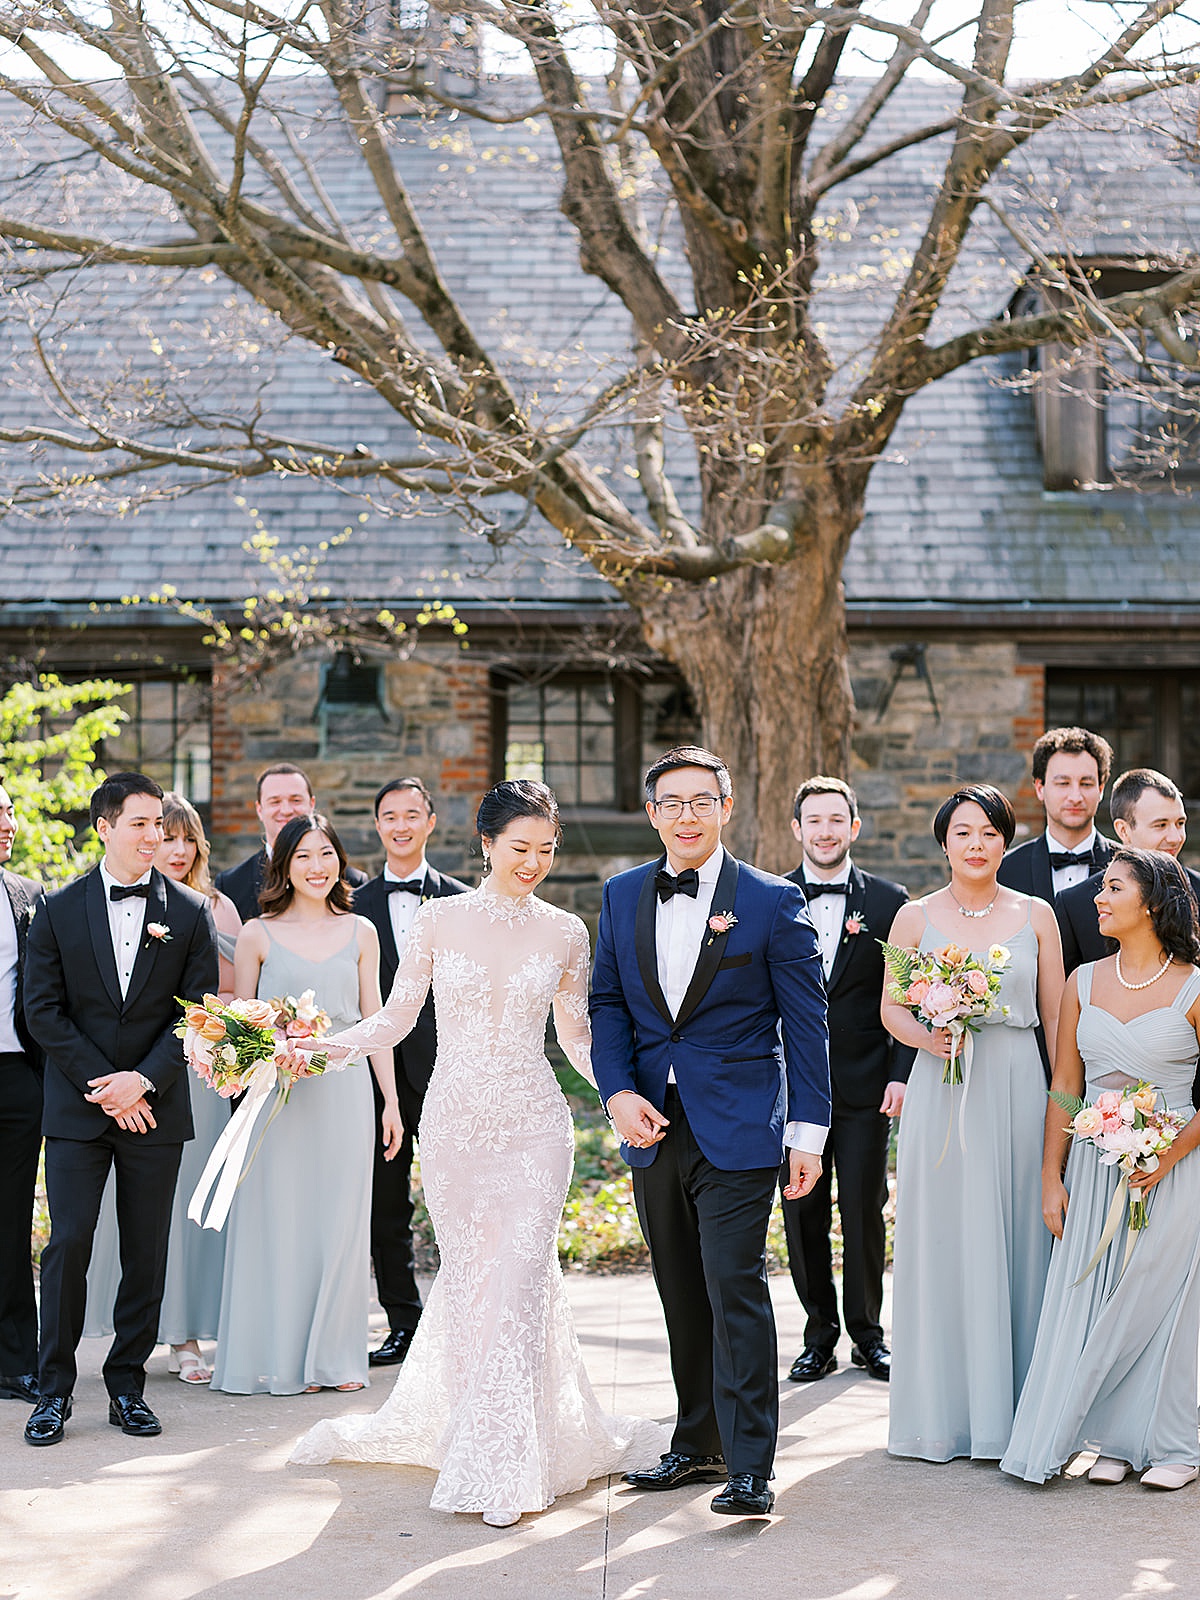 Black tie wedding party pose outdoor with pastel bouquets before elegant ceremony shot by Destination Luxury Photographer